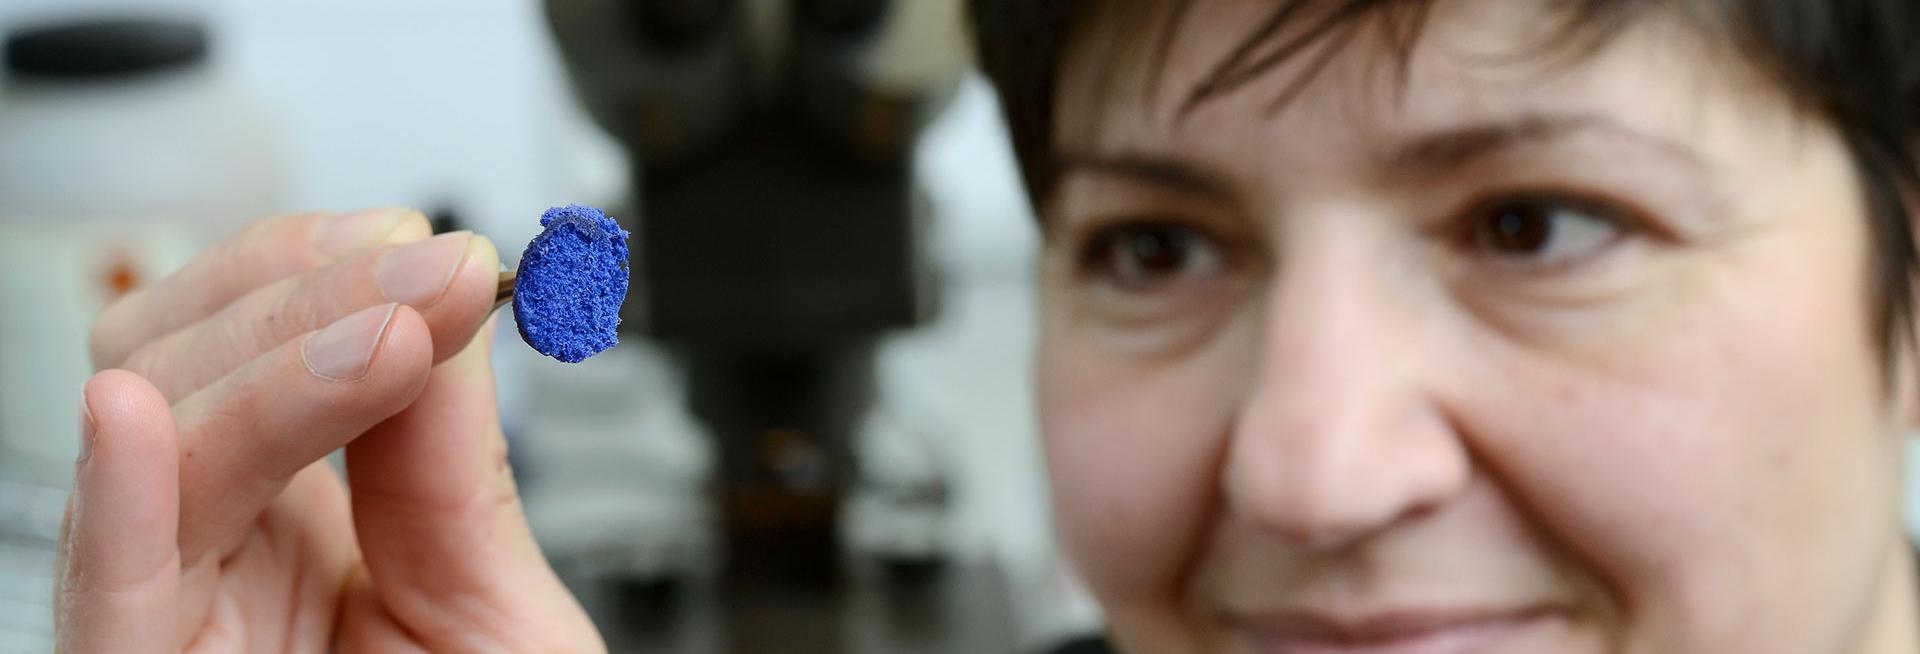 Image shows Professor Sonia Contera (face not fully in focus) with the focus on her hand holding tweezers which in turn hold a small piece of blue material. In the background out of focus is a microscope.